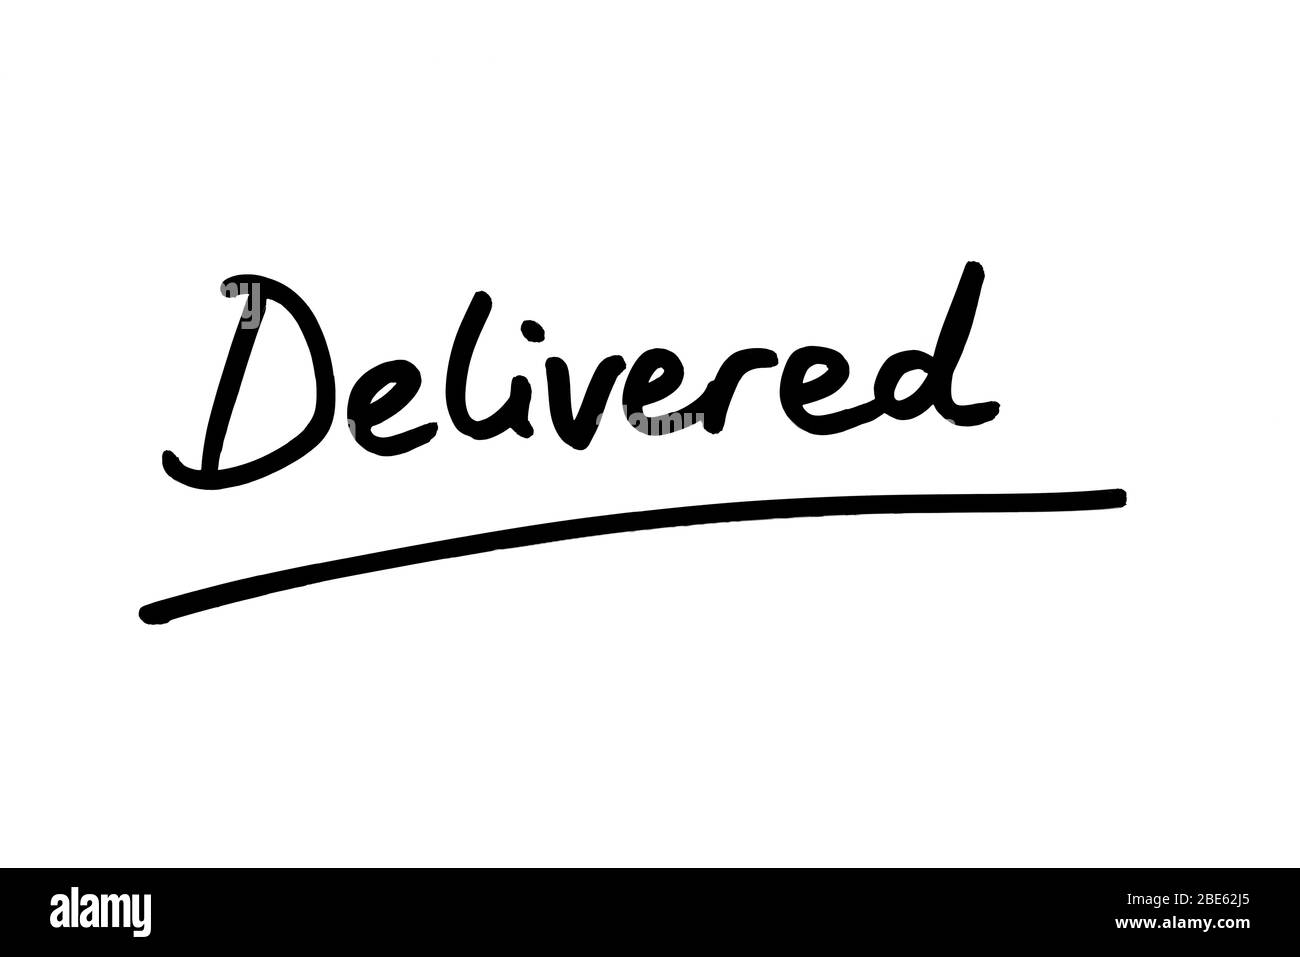 The word Delivered handwritten on a white background. Stock Photo